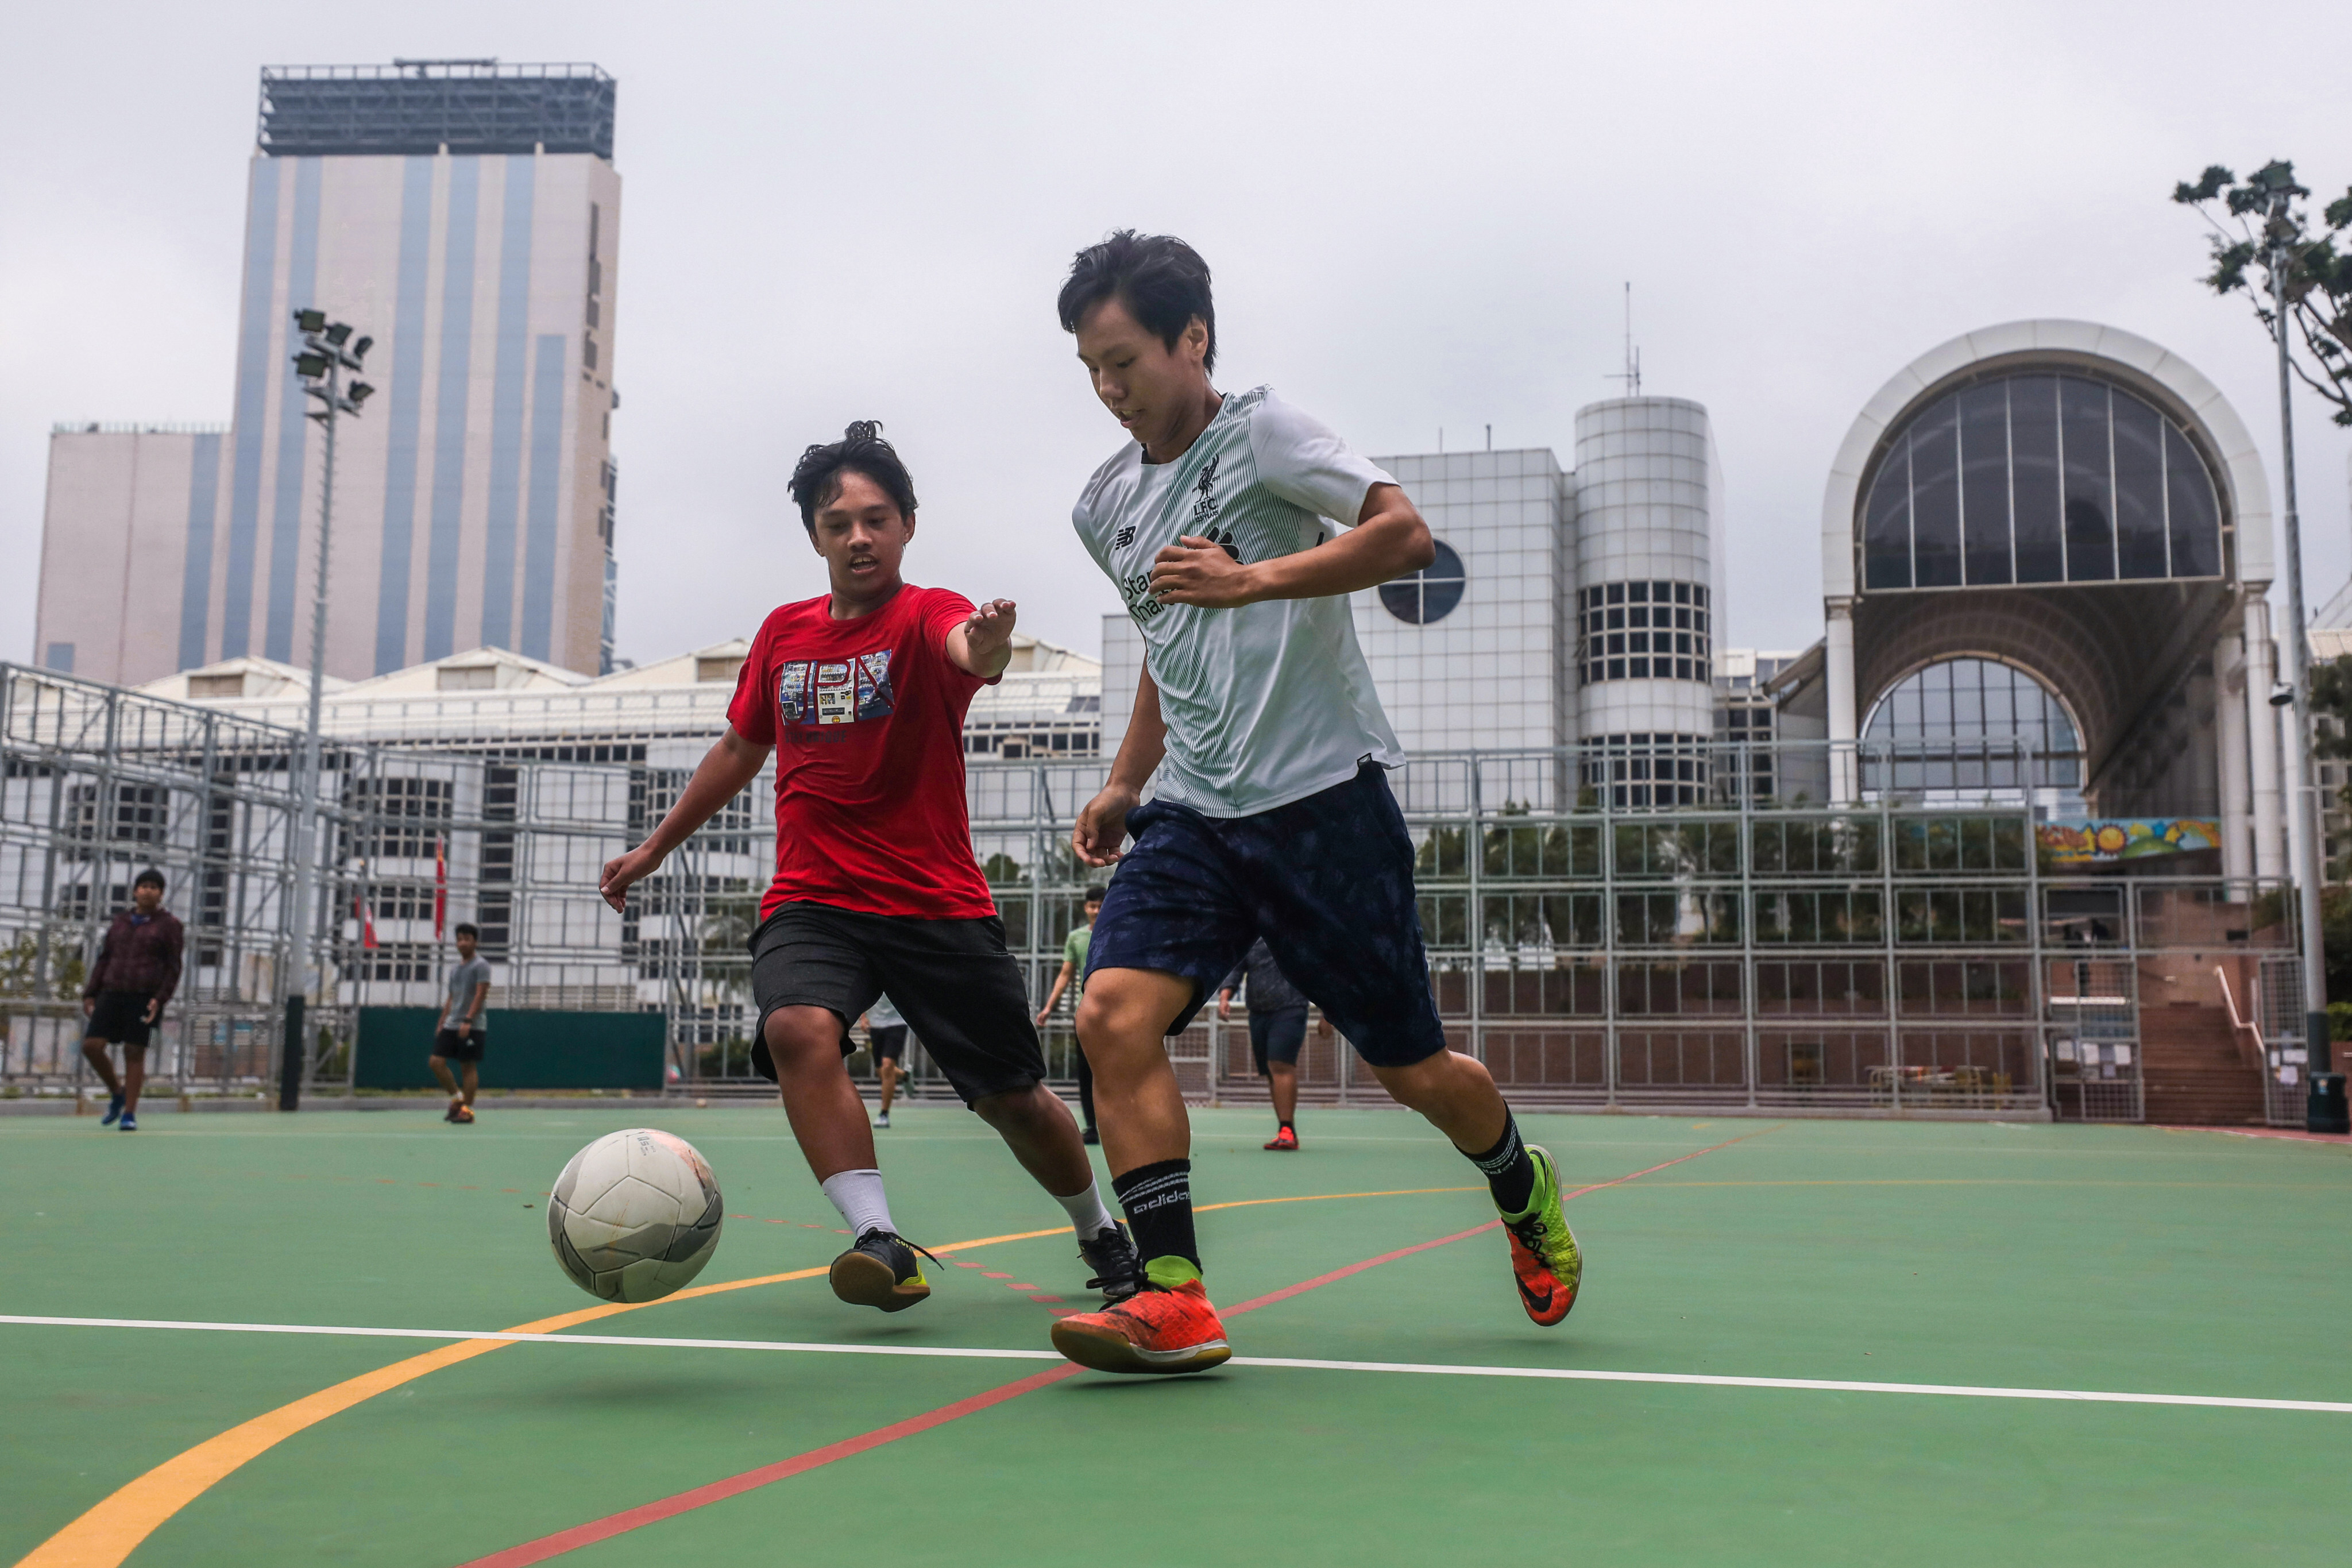 About 1 million residents do not have access to sports grounds in Hong Kong, according to a report by the city’s Audit Commission. Photo: Xiaomei Chen